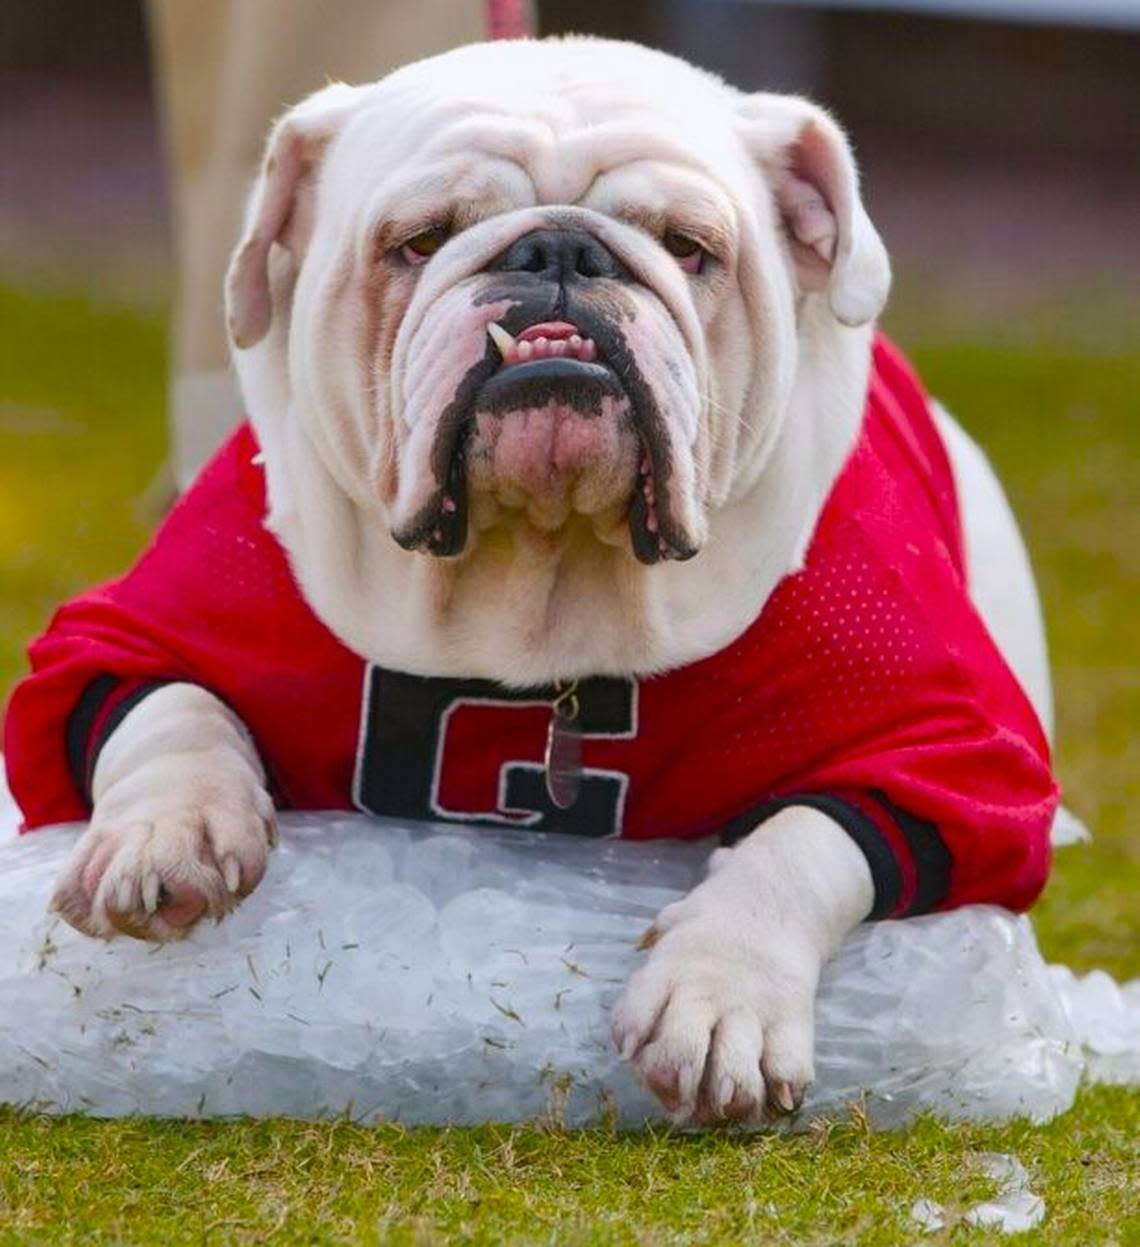 UGA VI chilled out on a sack of ice at the Georgia-Florida game in Jacksonville in late October of 2000.